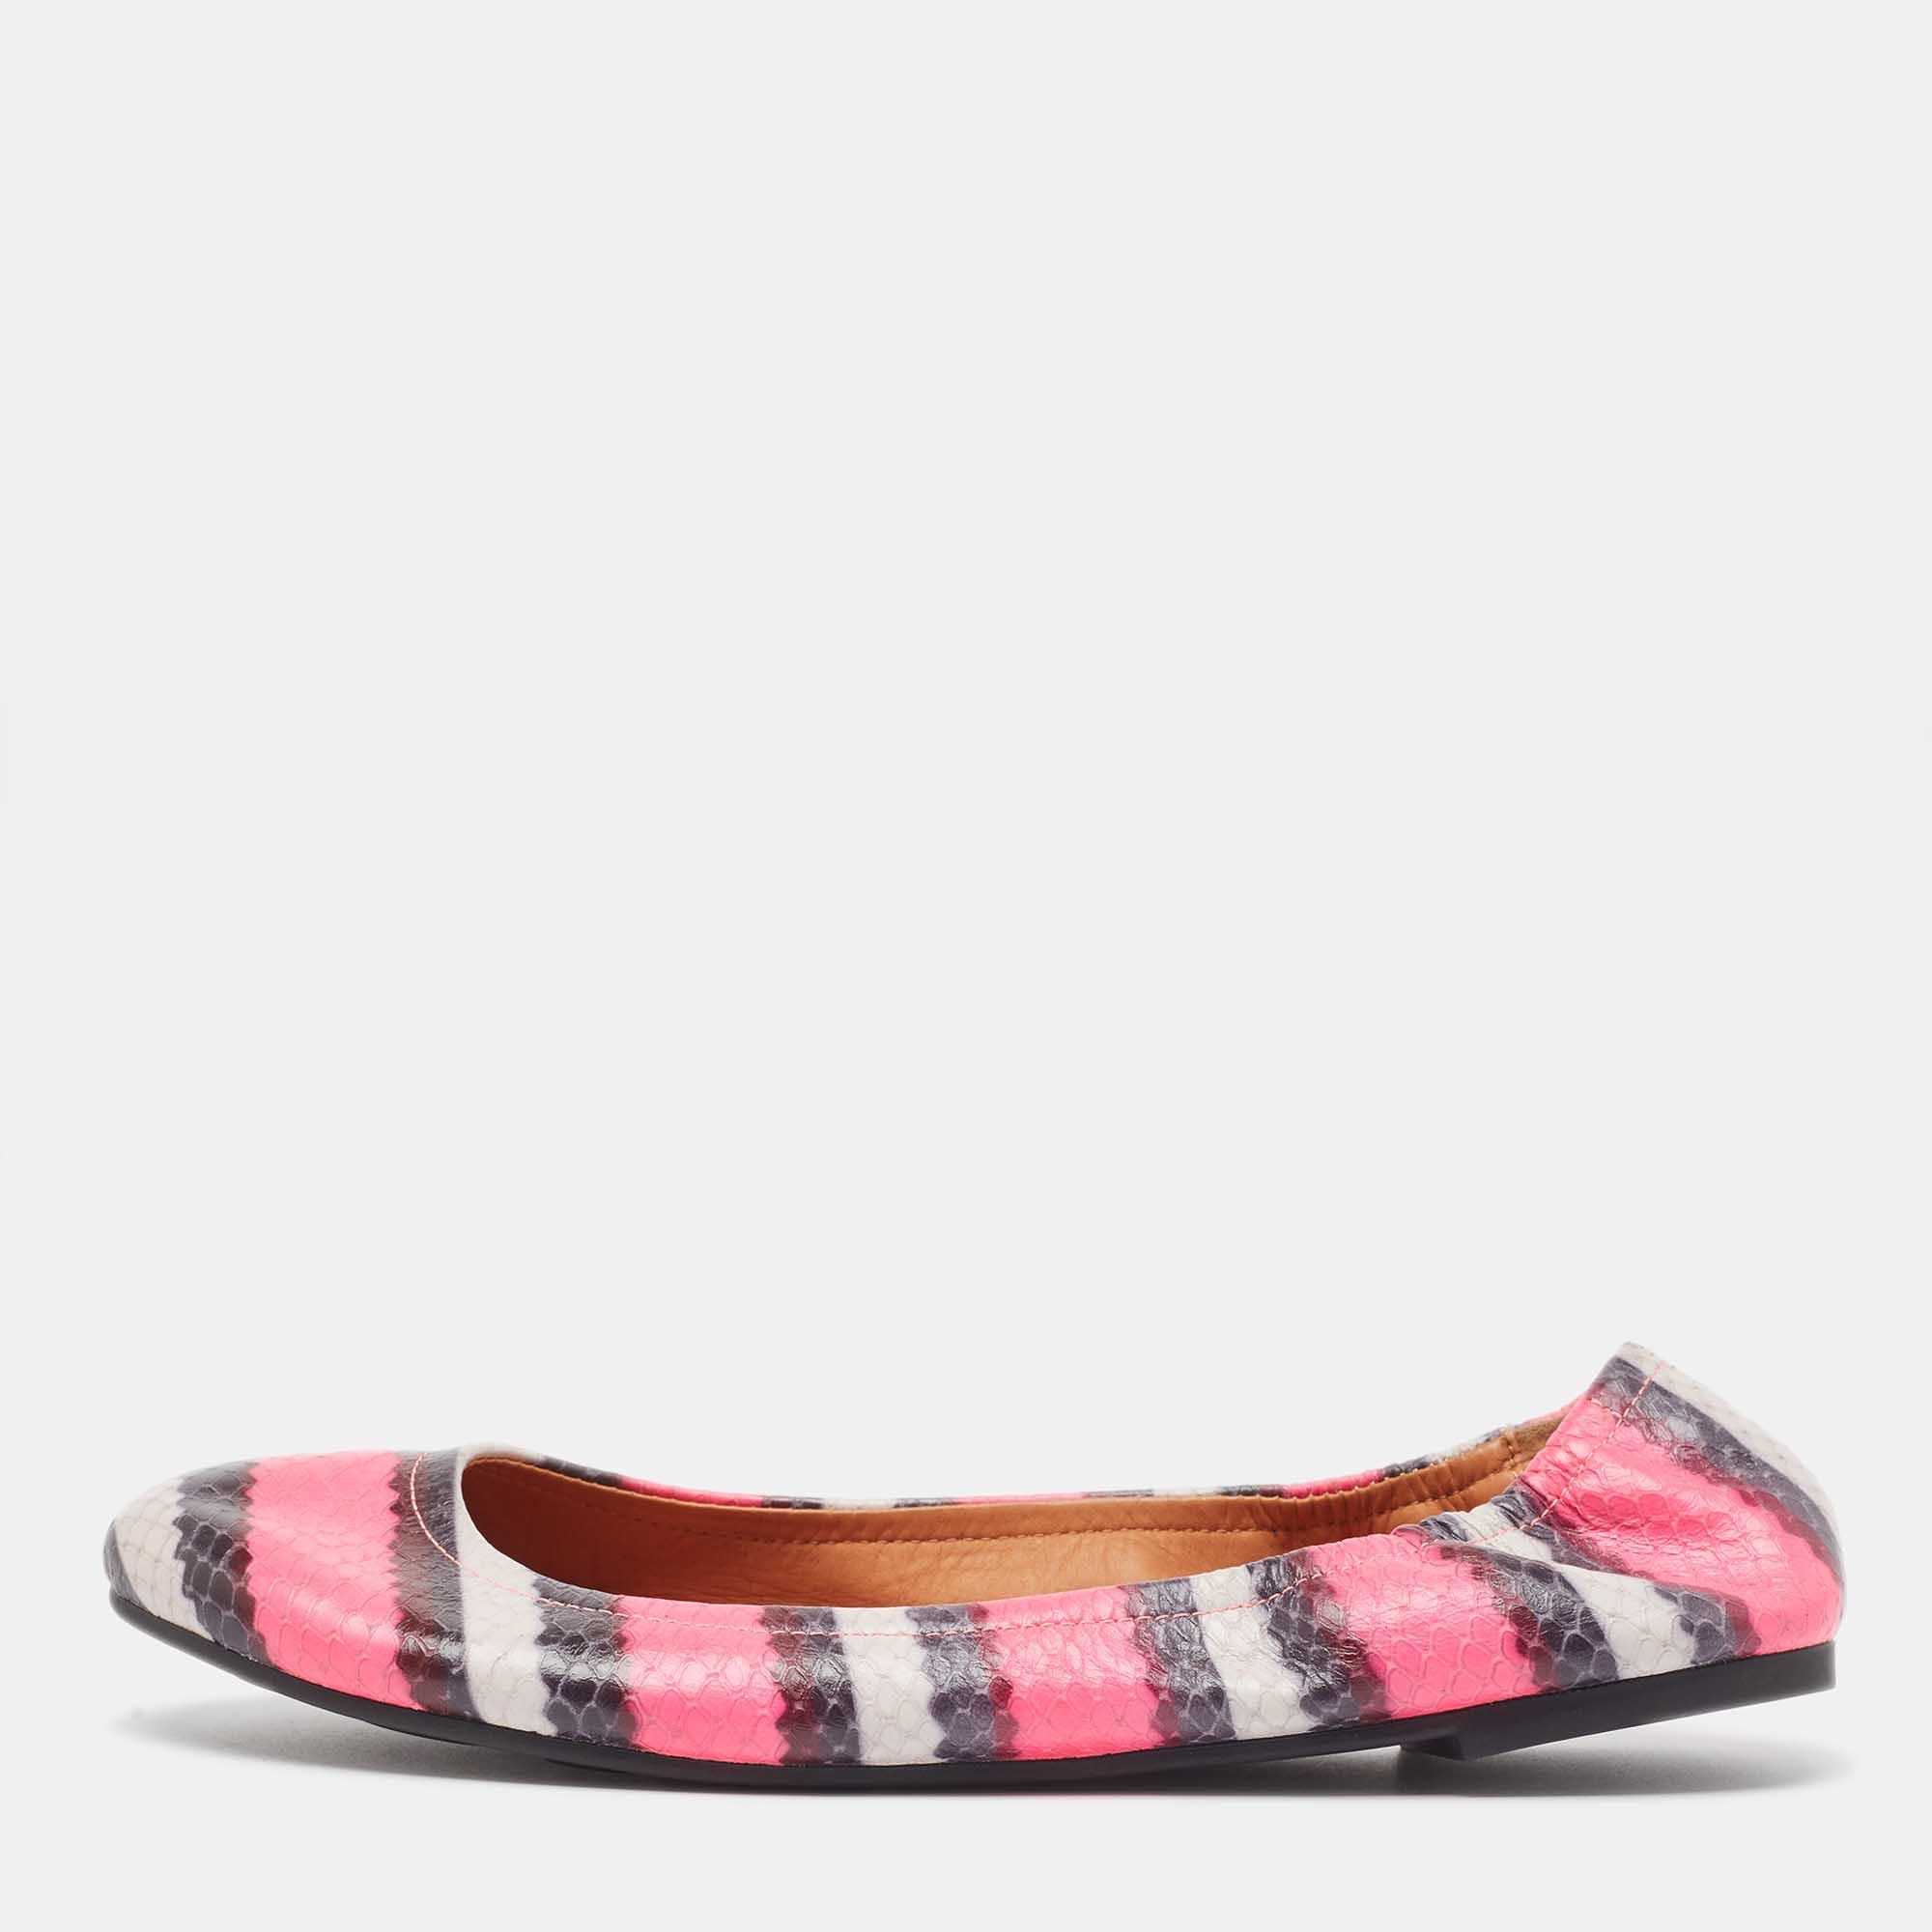 Marc by marc jacobs tricolor embossed python ballet flats size 37.5